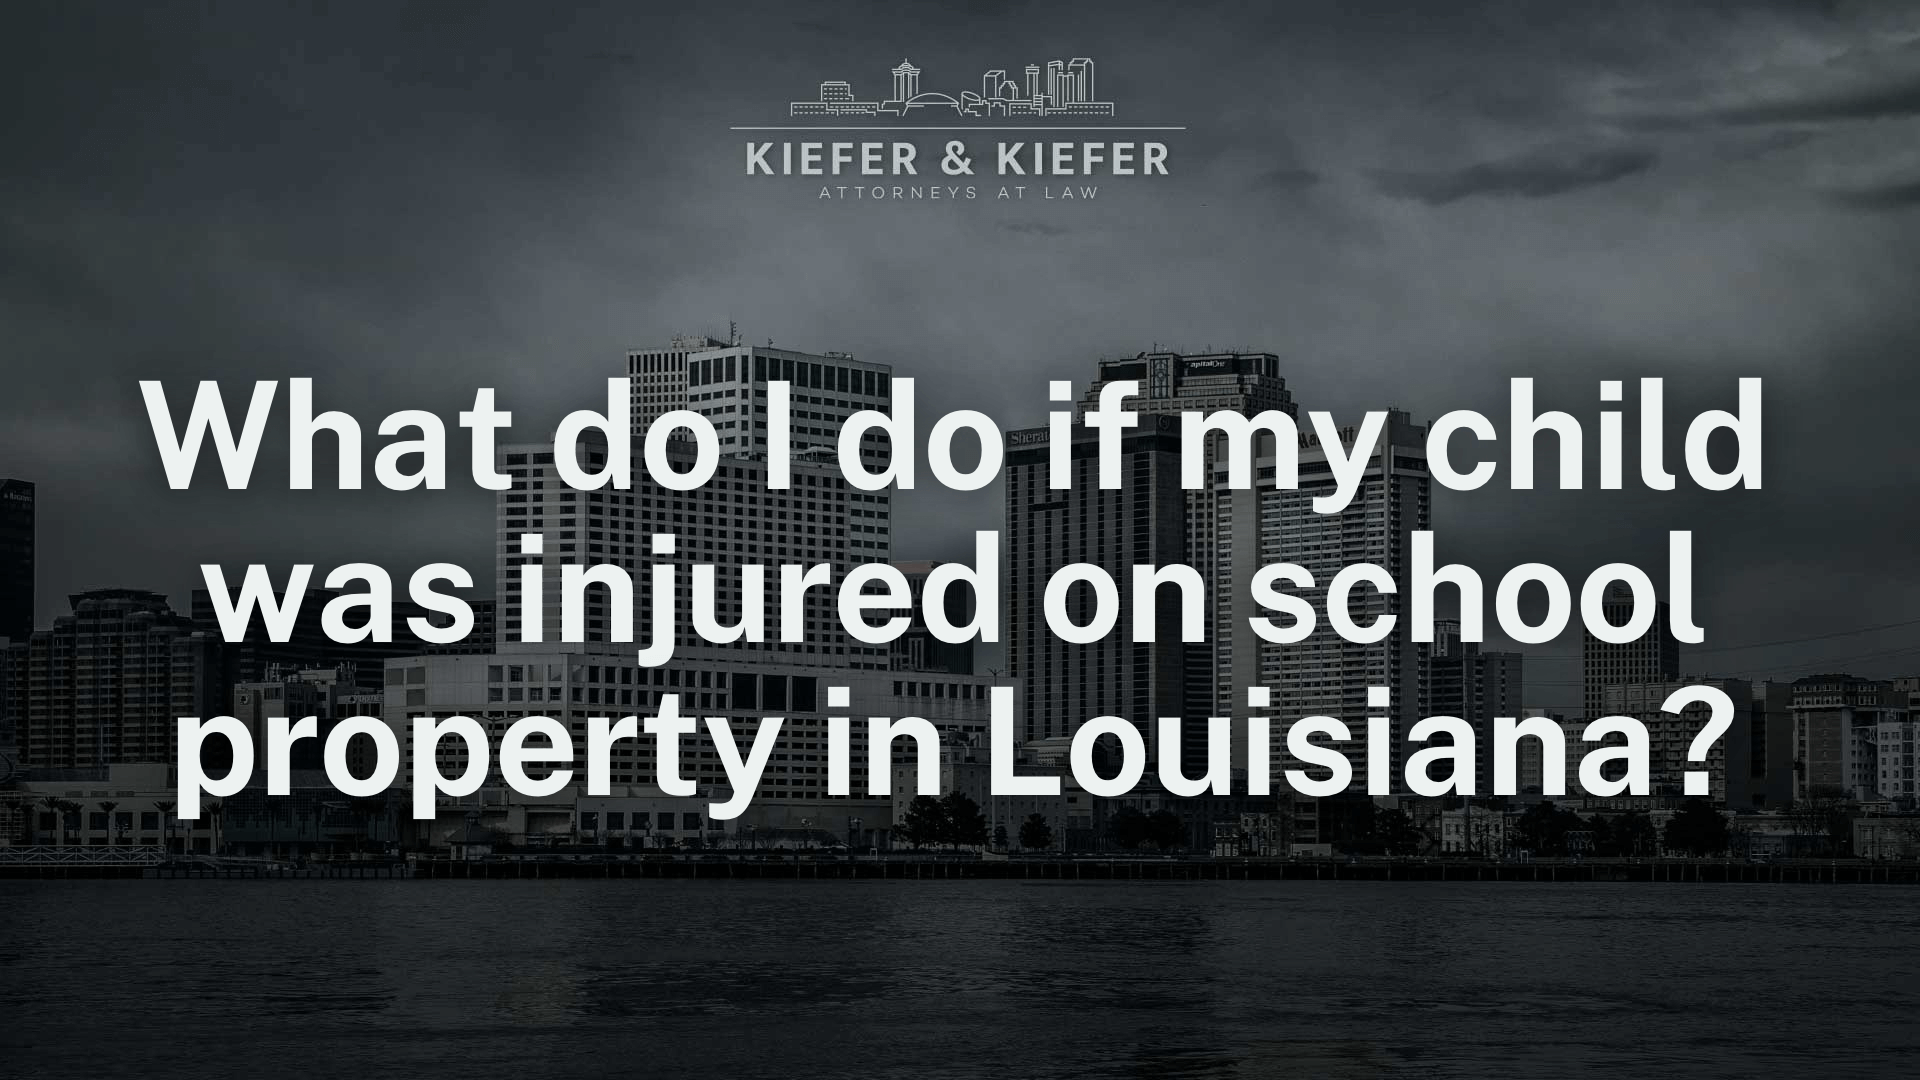 What do I do if my child was injured on school property in Louisiana - Kiefer & Kiefer New Orleans Personal Injury Attorneys